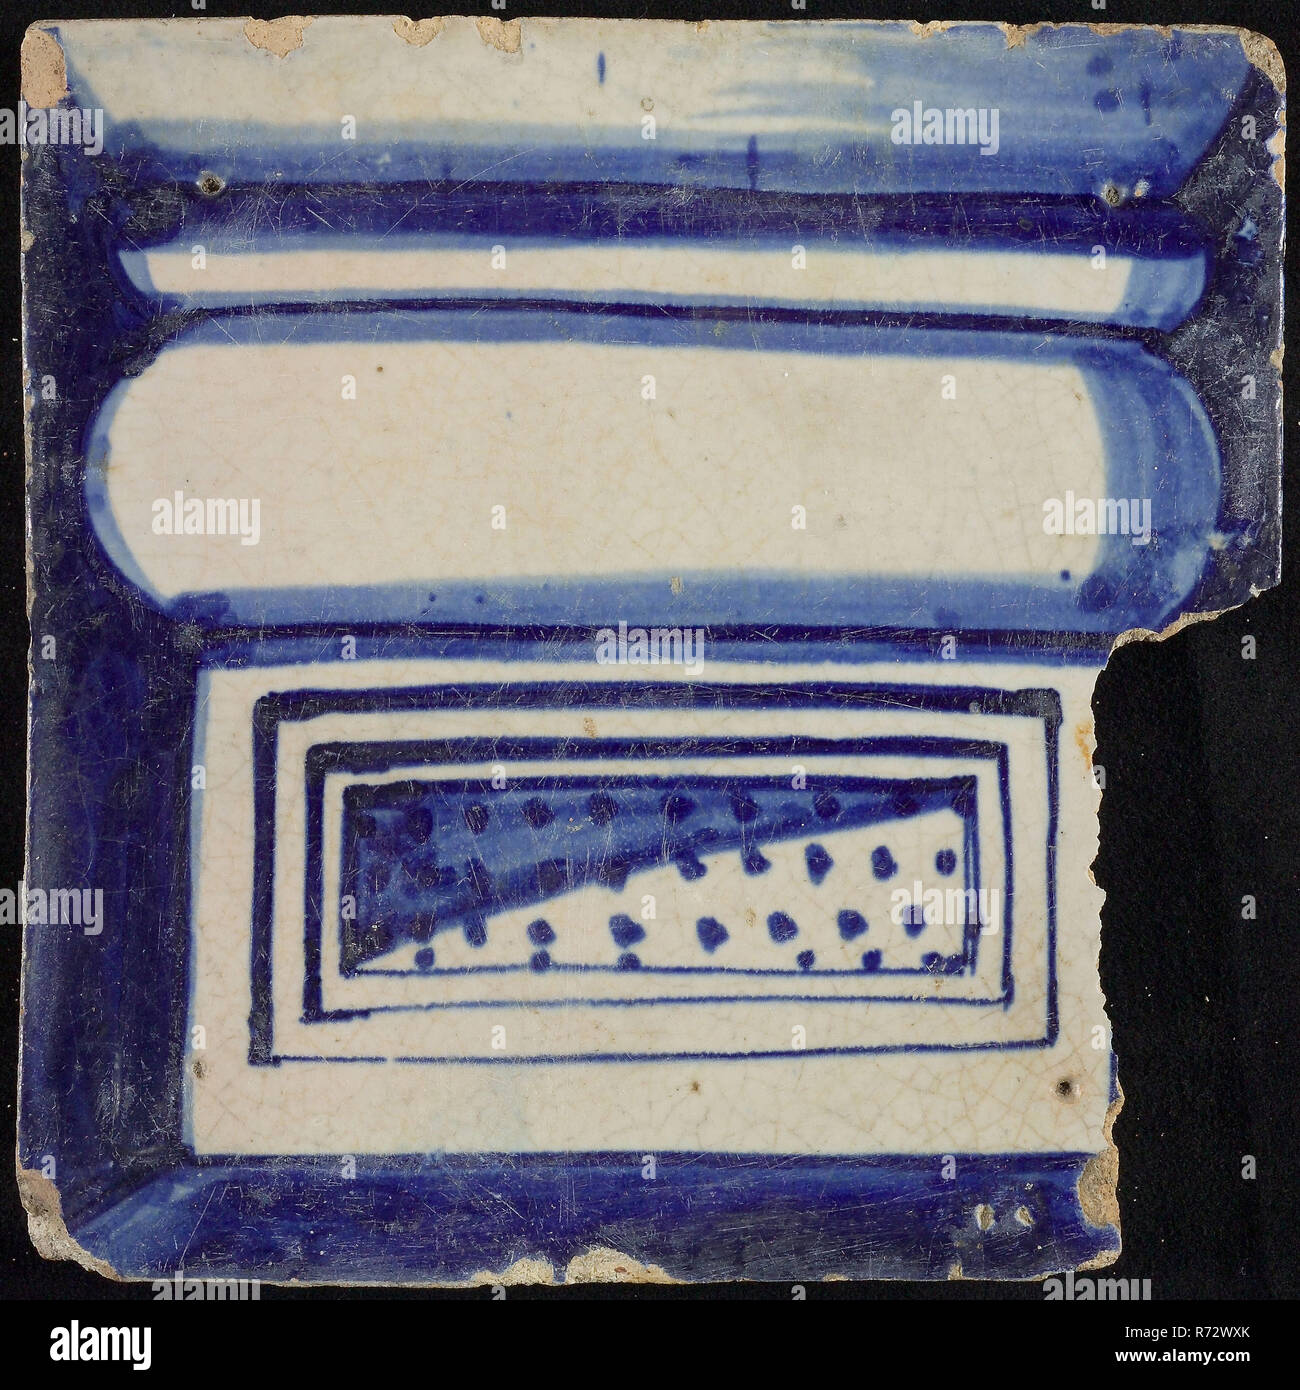 Tile of chimney pilaster, blue on white, bottom of column with basement, compartment with dots, chimney pilaster tile pilaster footage fragment ceramics pottery glaze, baked 2x glazed painted Tile part of chimney pilaster originally twelve or thirteen high Rony shard square four nail holes. Blue on white fond. Tile forms part of one-row pilaster in Renaissance style and shows the underside of column with basement Flat with dots reverse side of the middle with below 1 or slack S (see also 843 and 845) 1914 construction city hall Zandstraat-quarters Second World War war bombardment Rotterdam Sta Stock Photo